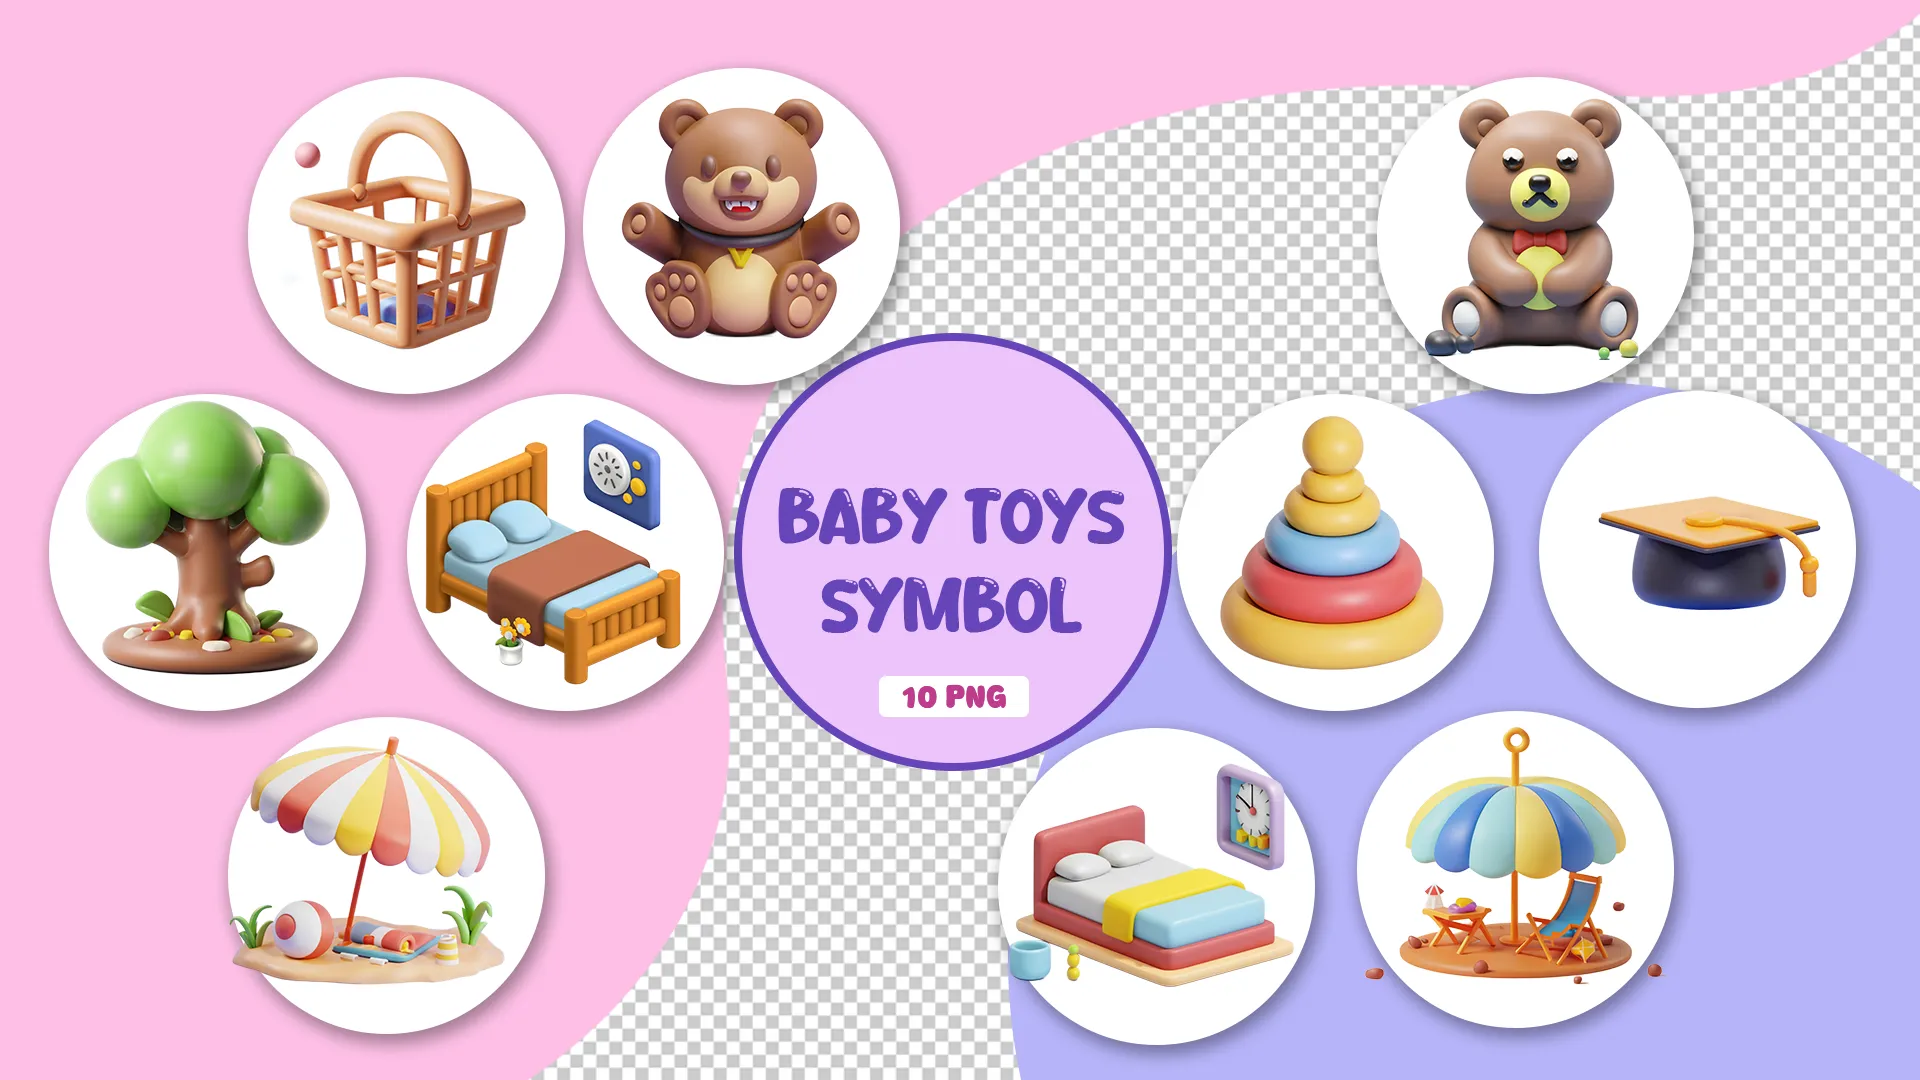 Unique 3D Models for Small Toy Pack image